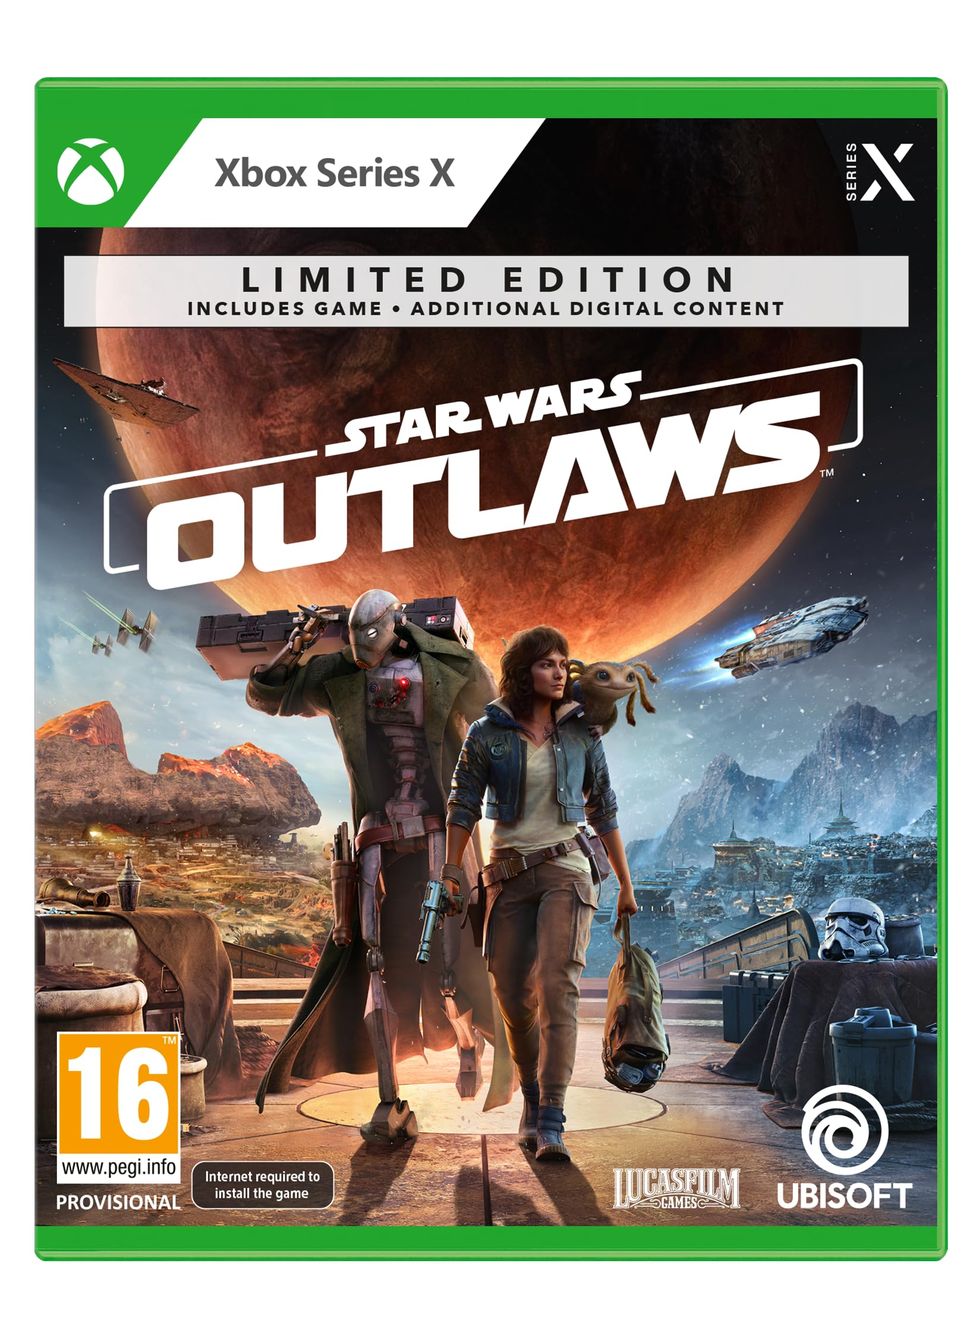 Star Wars Outlaws Limited Edition (Exclusive to Amazon.co.uk) (Xbox Series X)